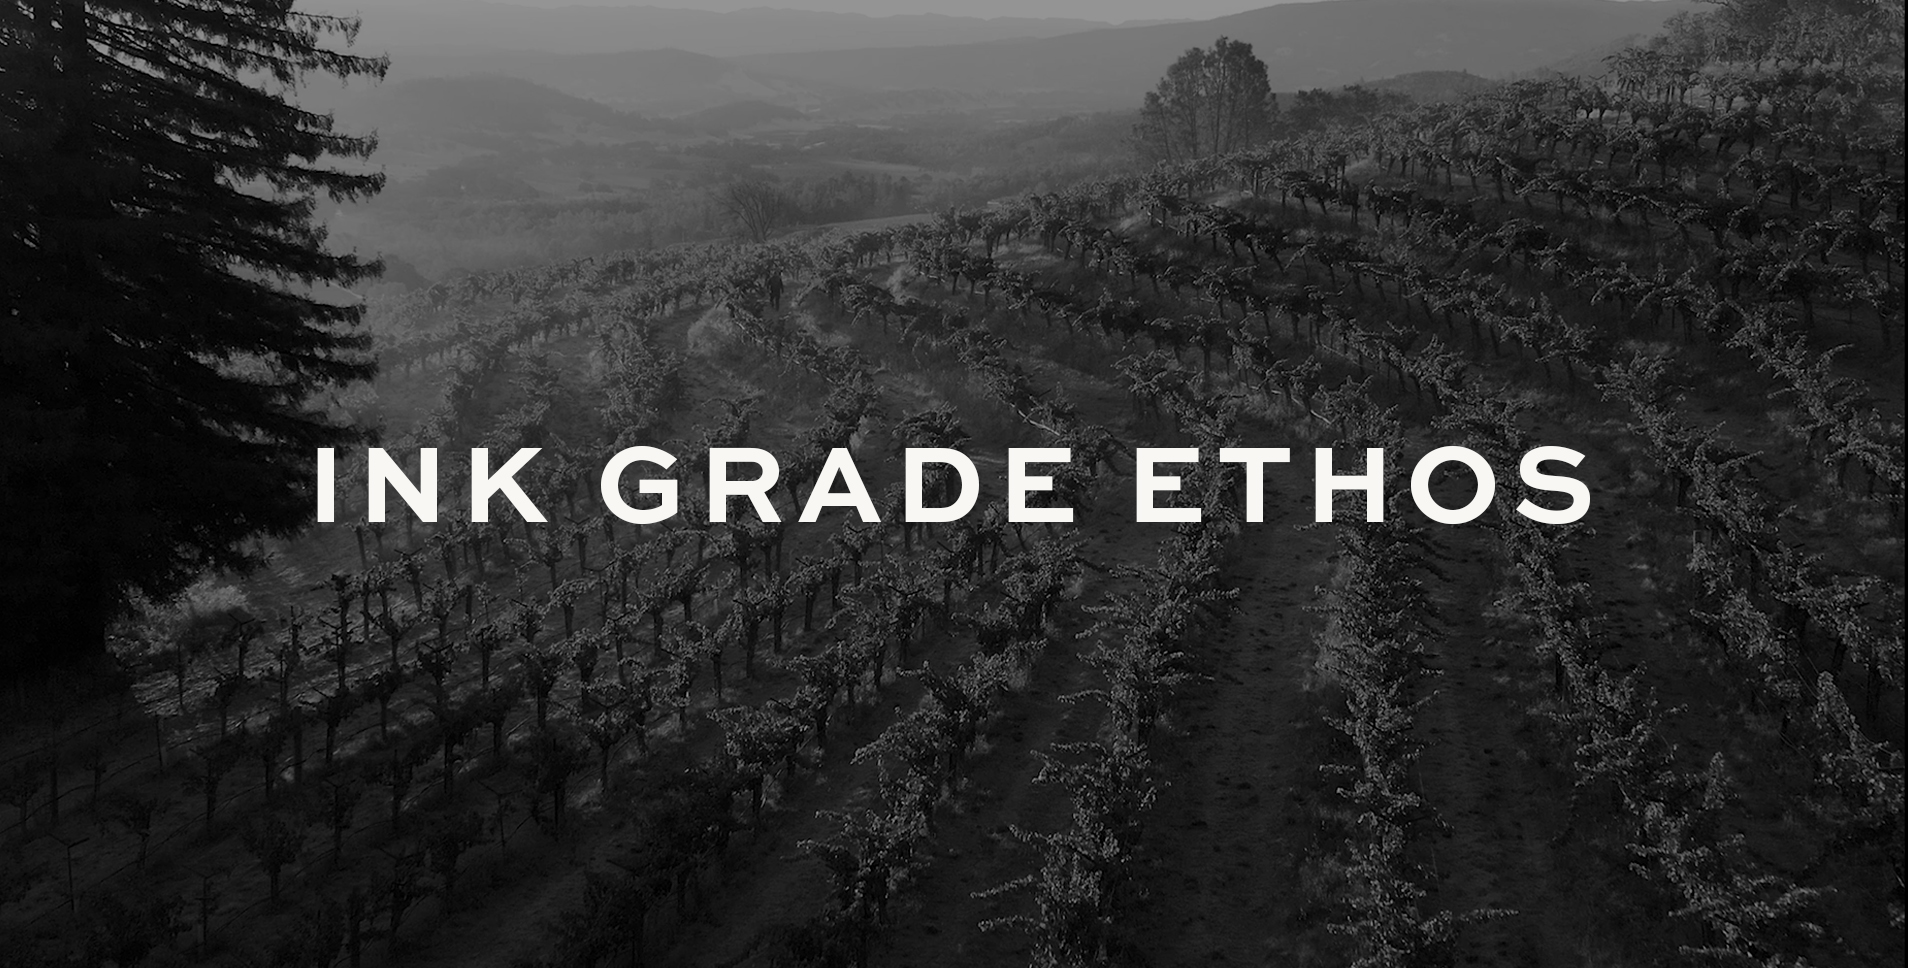 Black and white steeply inclined vineyards with text Ink Grade Ethos superimposed